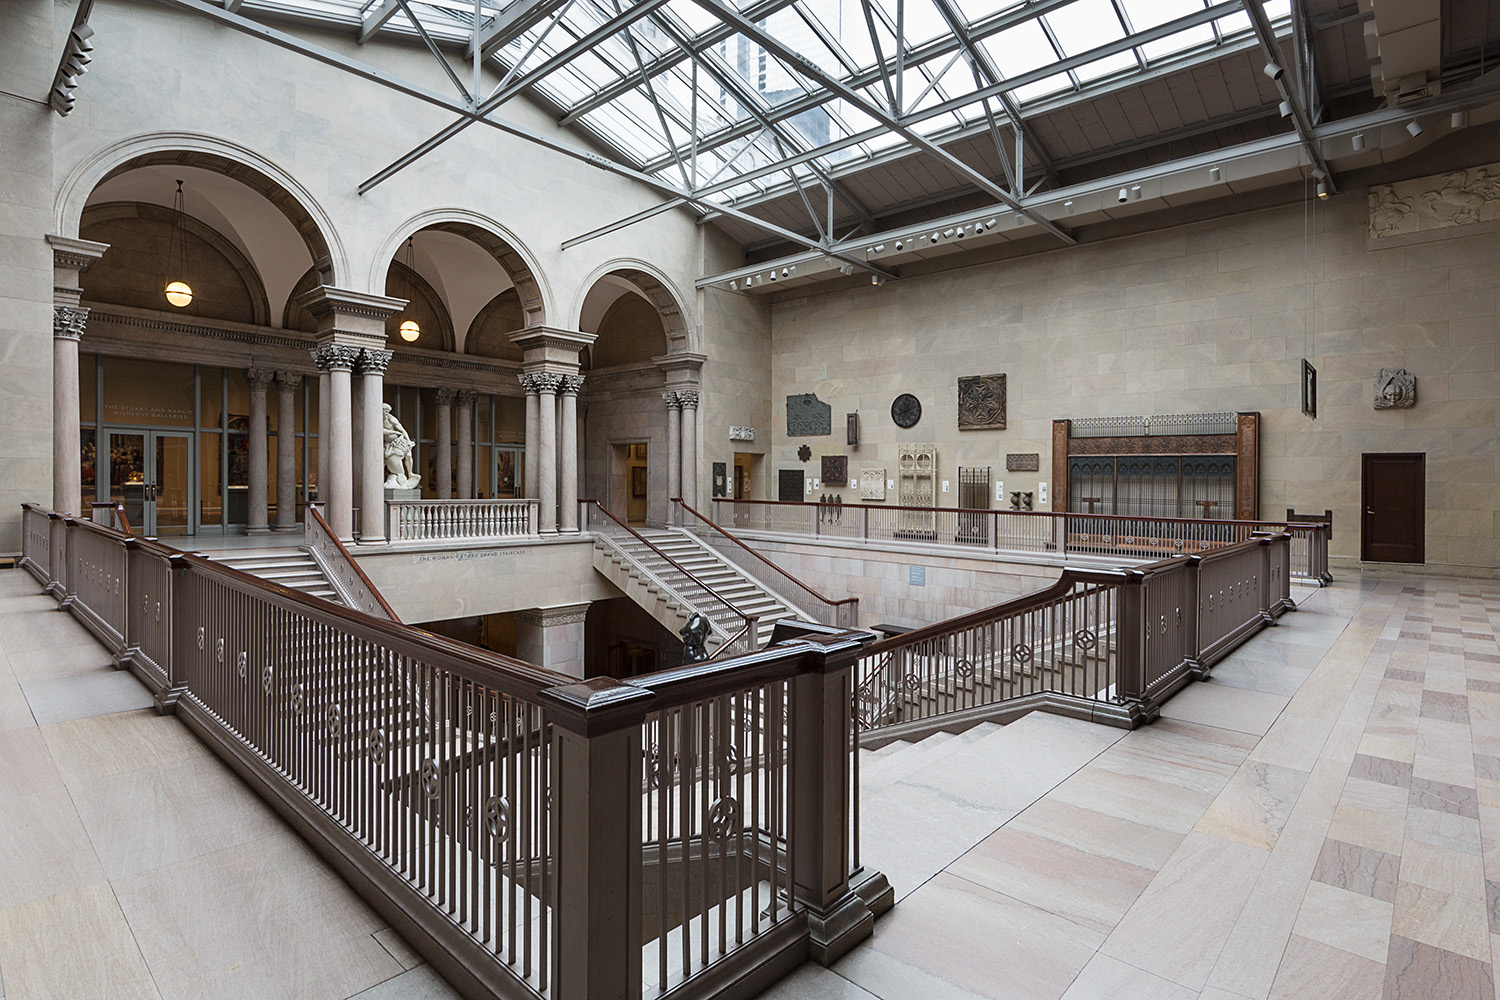 Art Institute of Chicago : Early Chicago Architectual Fragments